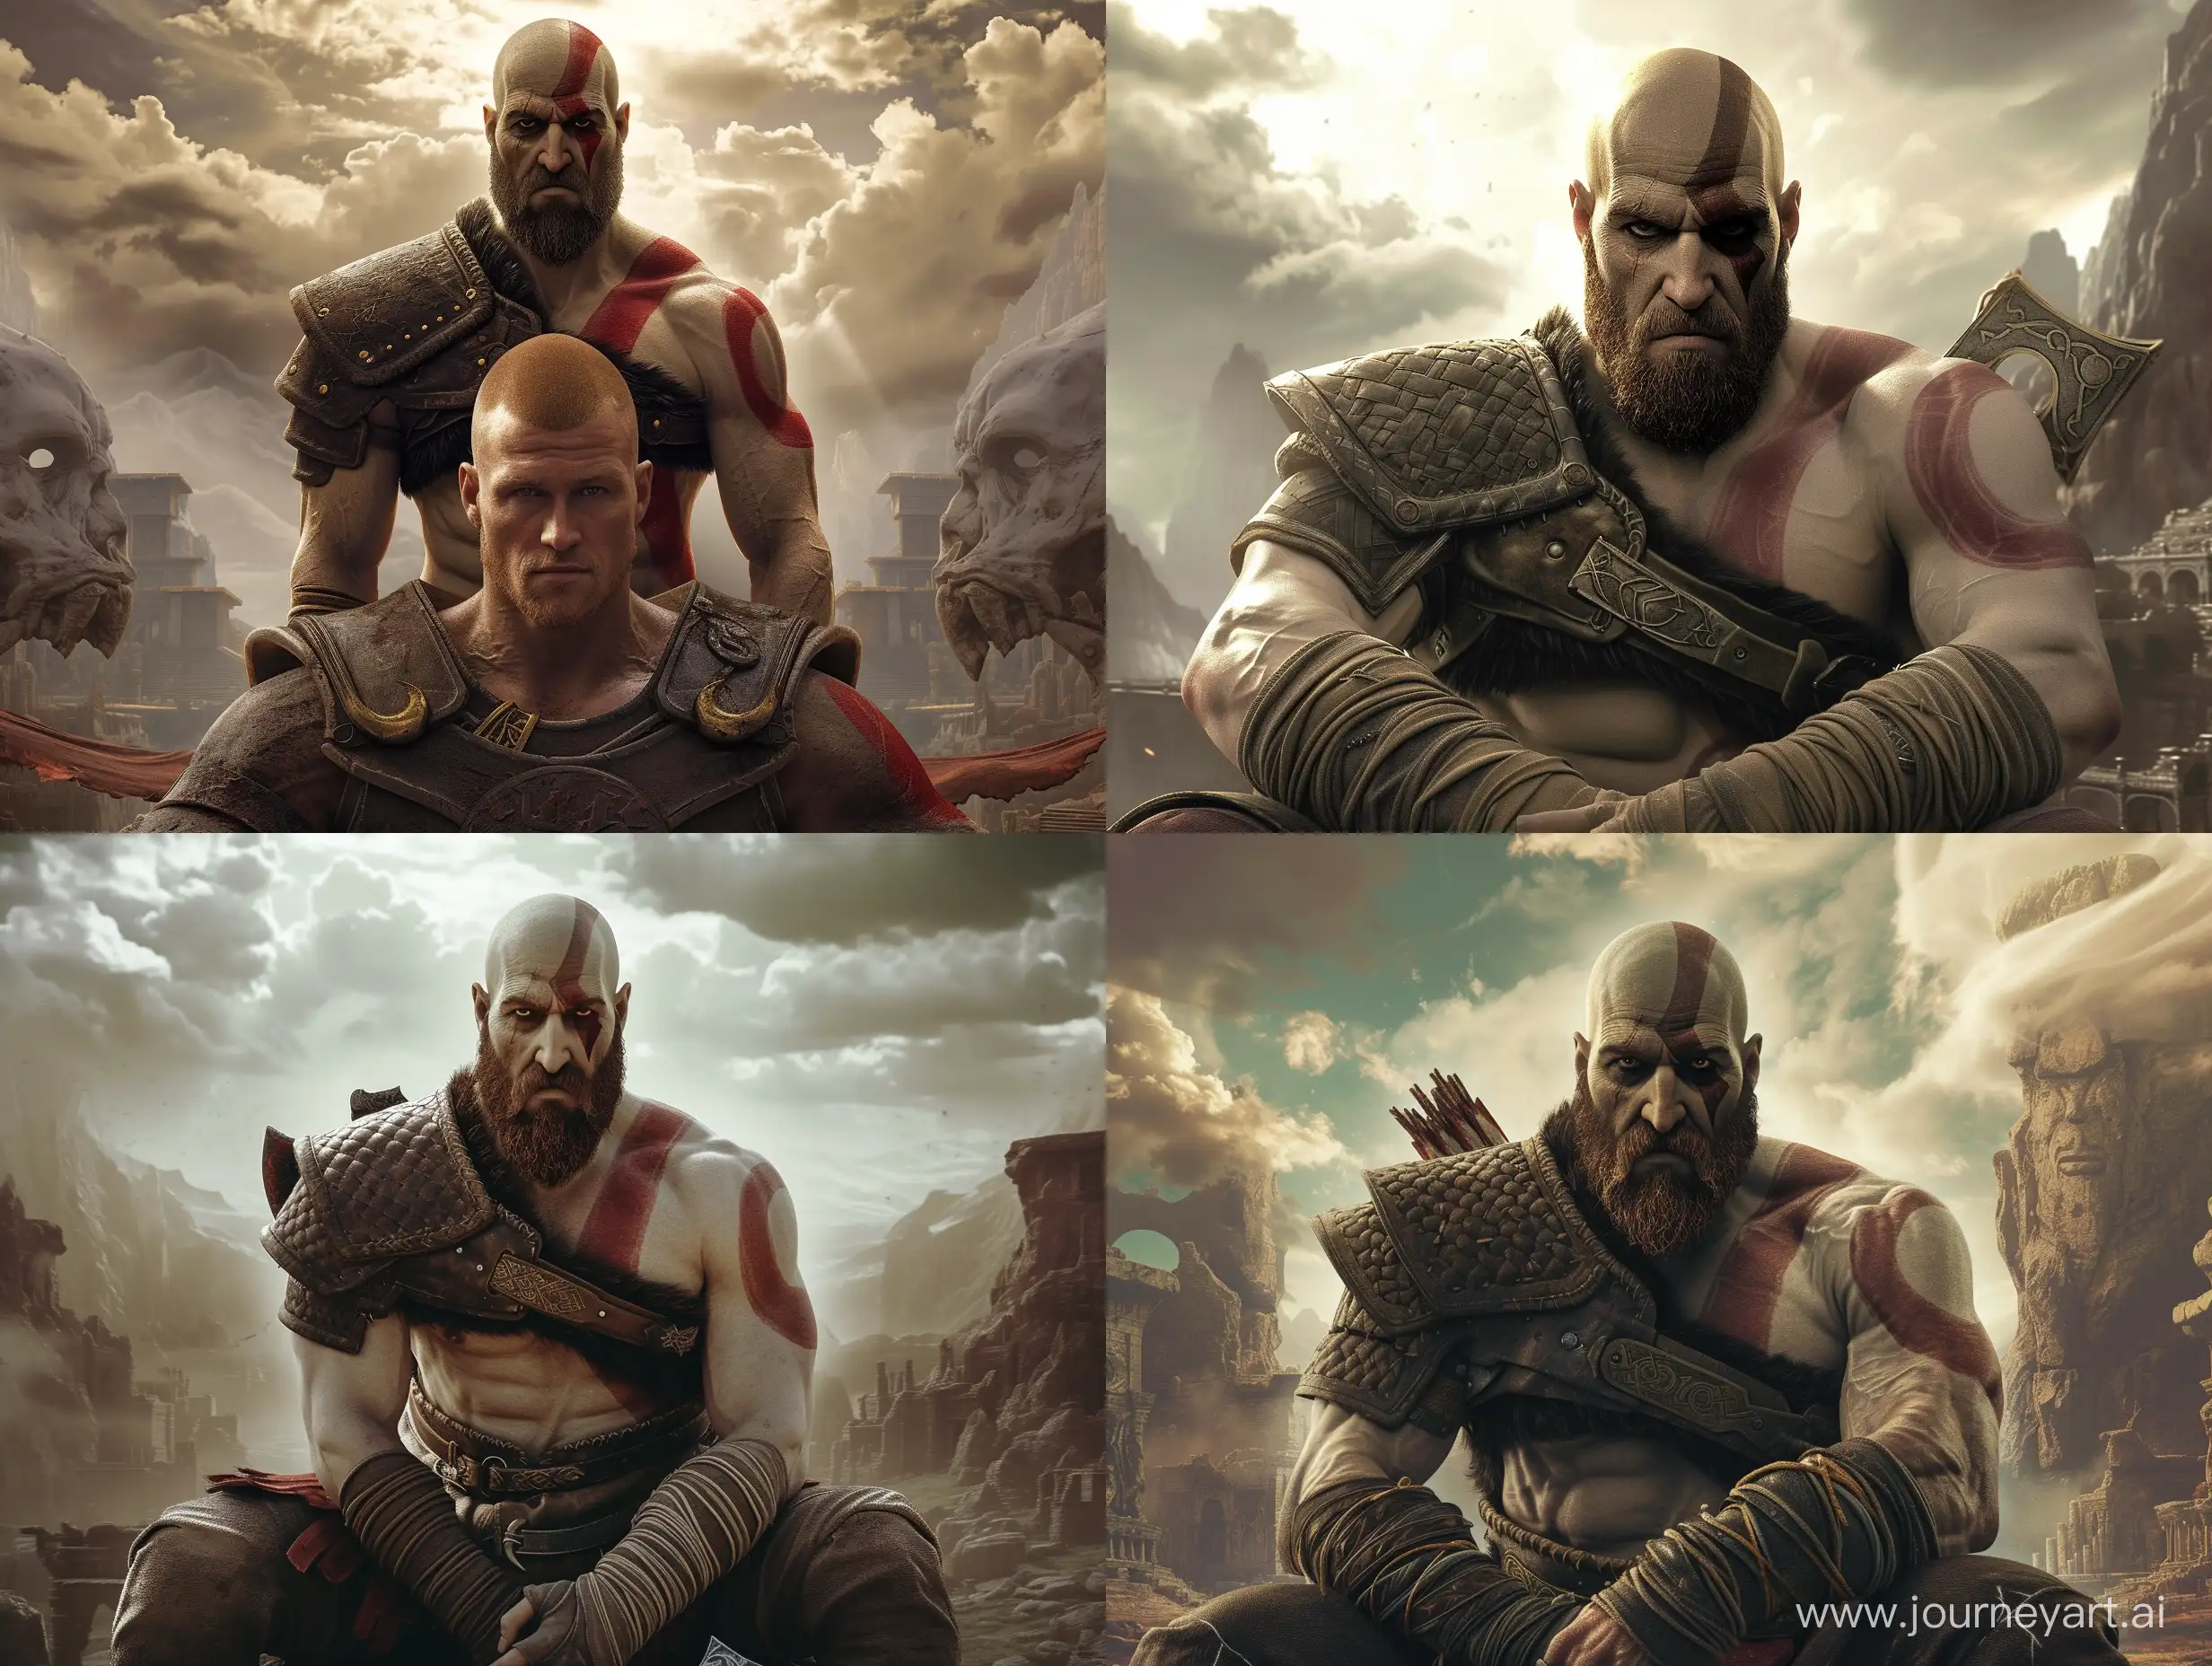 Kratos sits on Ishowspeed's shoulder and looks straight into the camera in a hyper-realistic photographic style, with the scene set in a mythical landscape reminiscent of the world of God of War. Ishowspeed, towering and muscular, embodies the godlike stature of Kratos, with his face transformed to resemble the iconic character. Kratos is depicted in his signature attire, adorned with intricate armor and wielding his iconic Leviathan Axe. He sits atop Ishowspeed's shoulder with a commanding presence, his gaze piercing and intense as he locks eyes with the viewer. The environment is epic and grandiose, with towering mountains, ancient ruins, and swirling storm clouds adding to the epic scale of the scene. The art style prioritizes meticulous detail and lifelike rendering, capturing the texture of Ishowspeed's skin and the intricate details of Kratos' armor with remarkable authenticity. The camera angle is carefully chosen to capture the scene from a dramatic perspective, emphasizing the power and intensity of Kratos' stare. Rendered with high resolution and naturalistic lighting to enhance the hyper-realism of the scene.